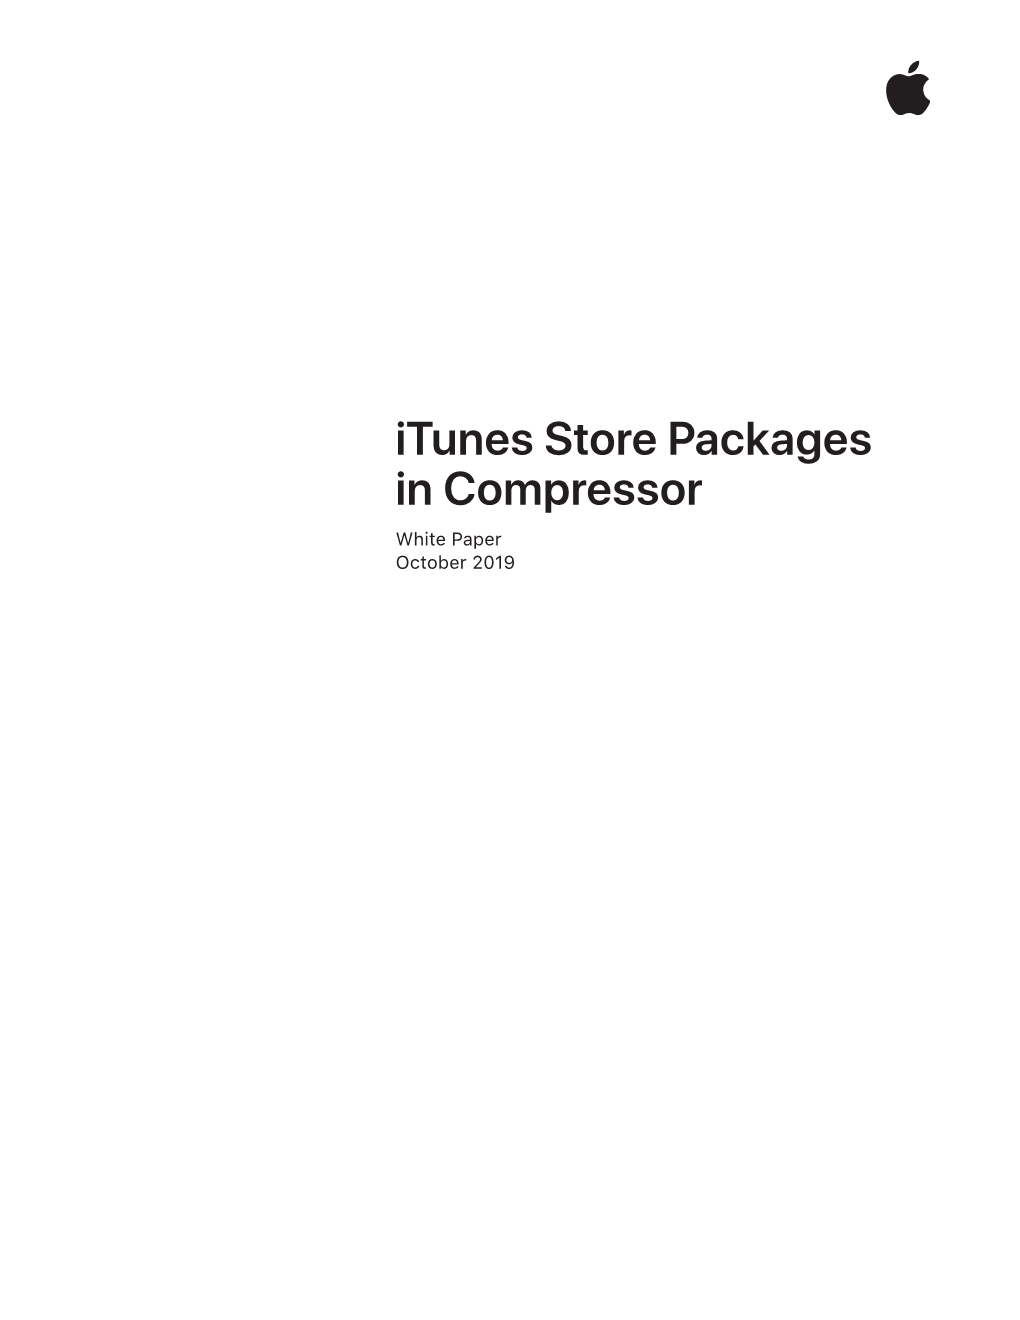 Itunes Store Packages in Compressor White Paper October 2019 Contents